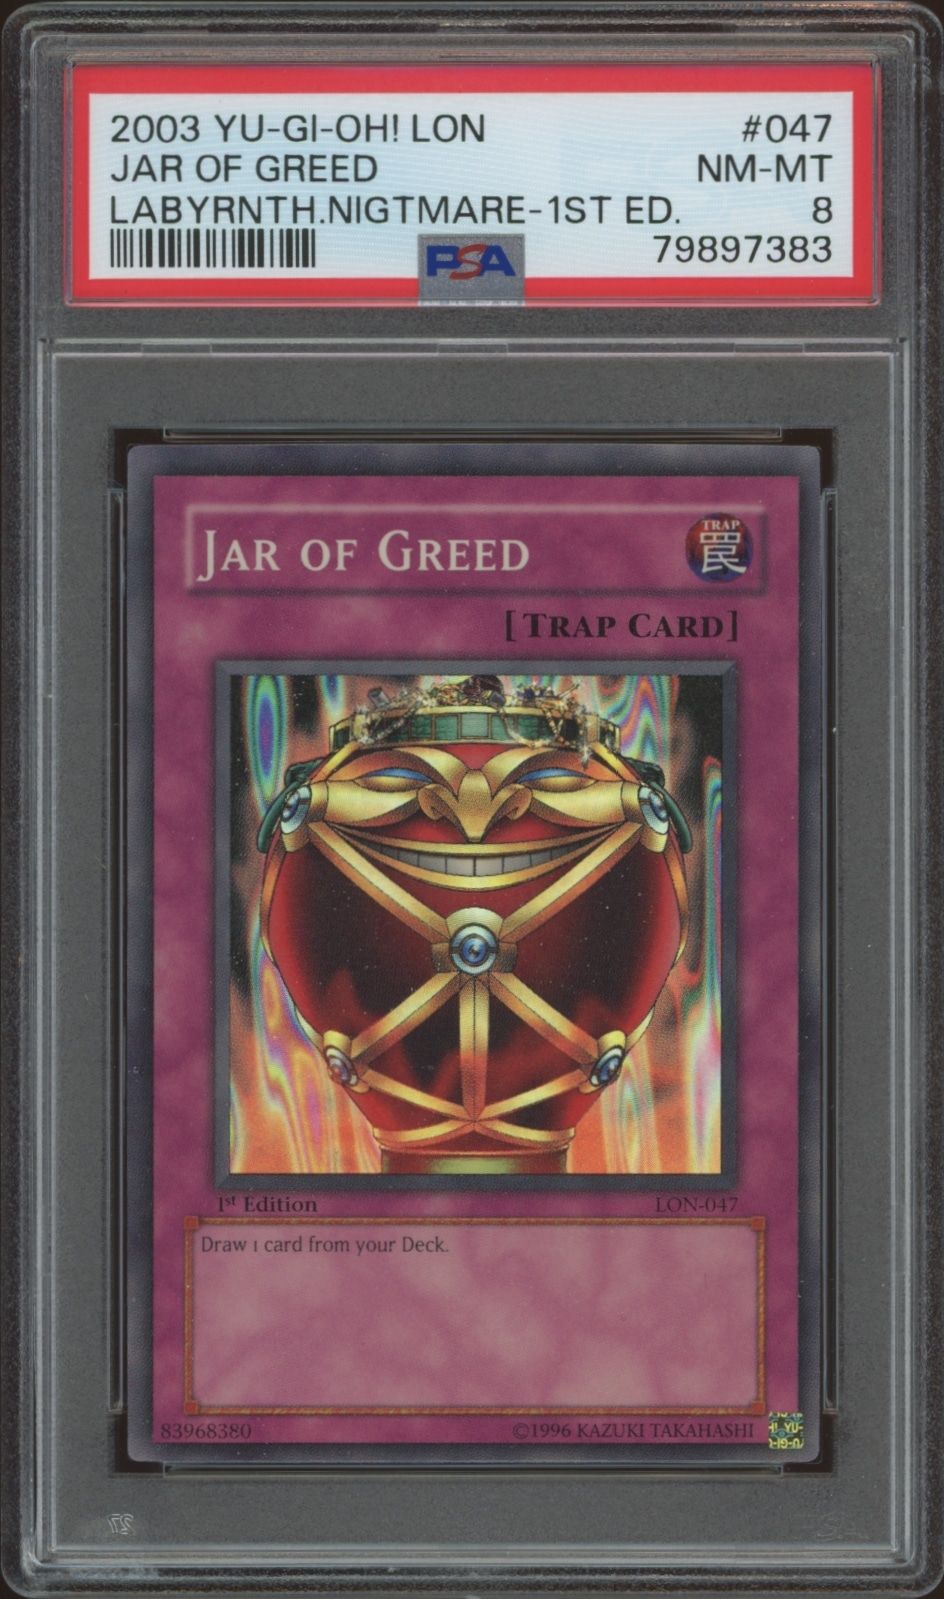 PSA-graded Yu-Gi-Oh! Jar of Greed card from 2003 Labyrinth of Nightmare 1st Edition set.